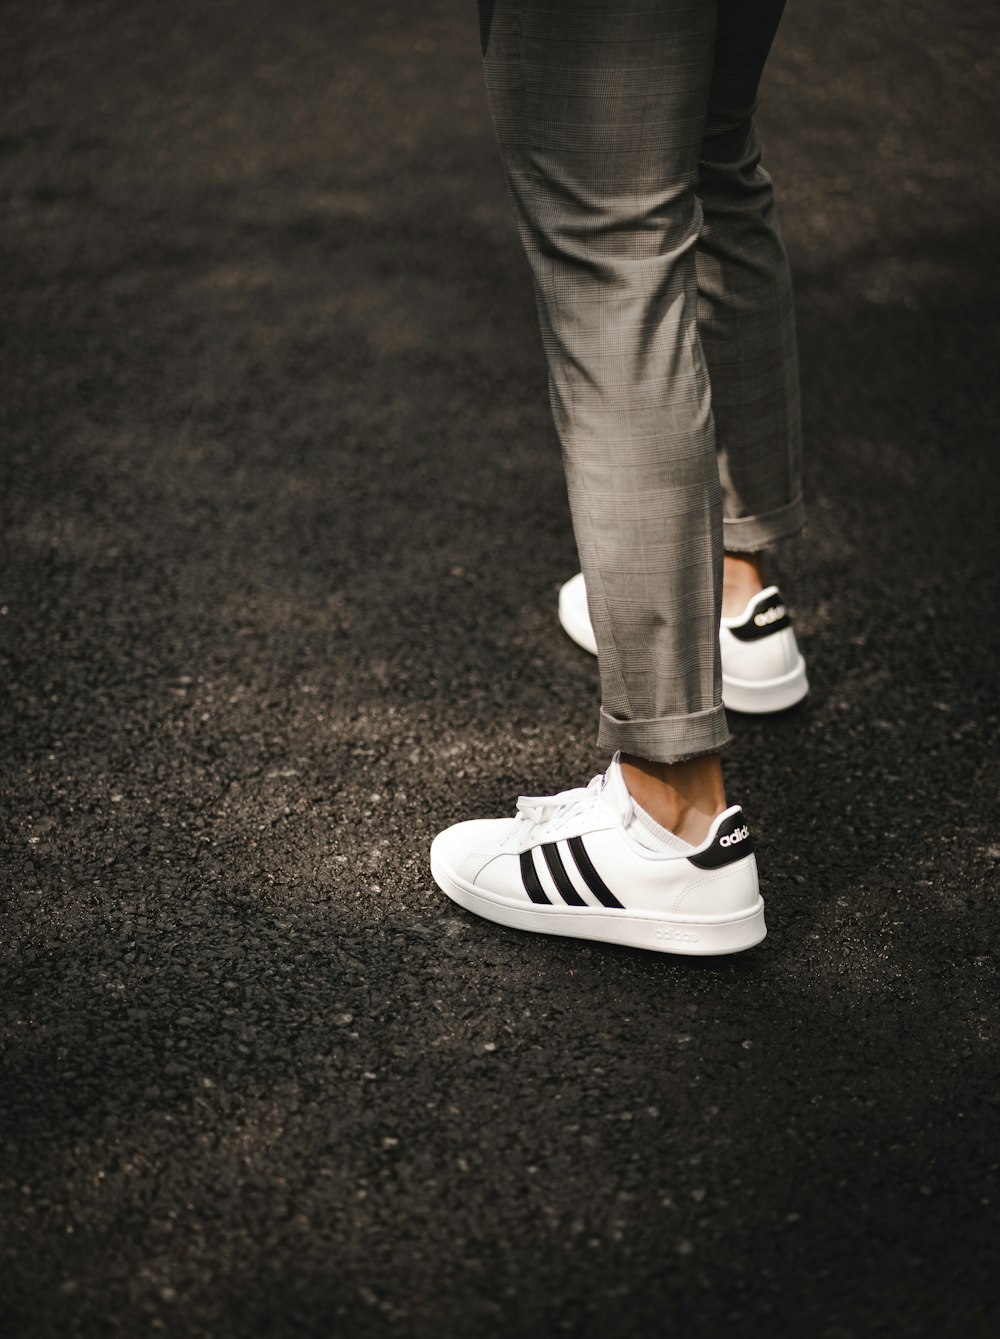 person in gray pants wearing white and black sneakers